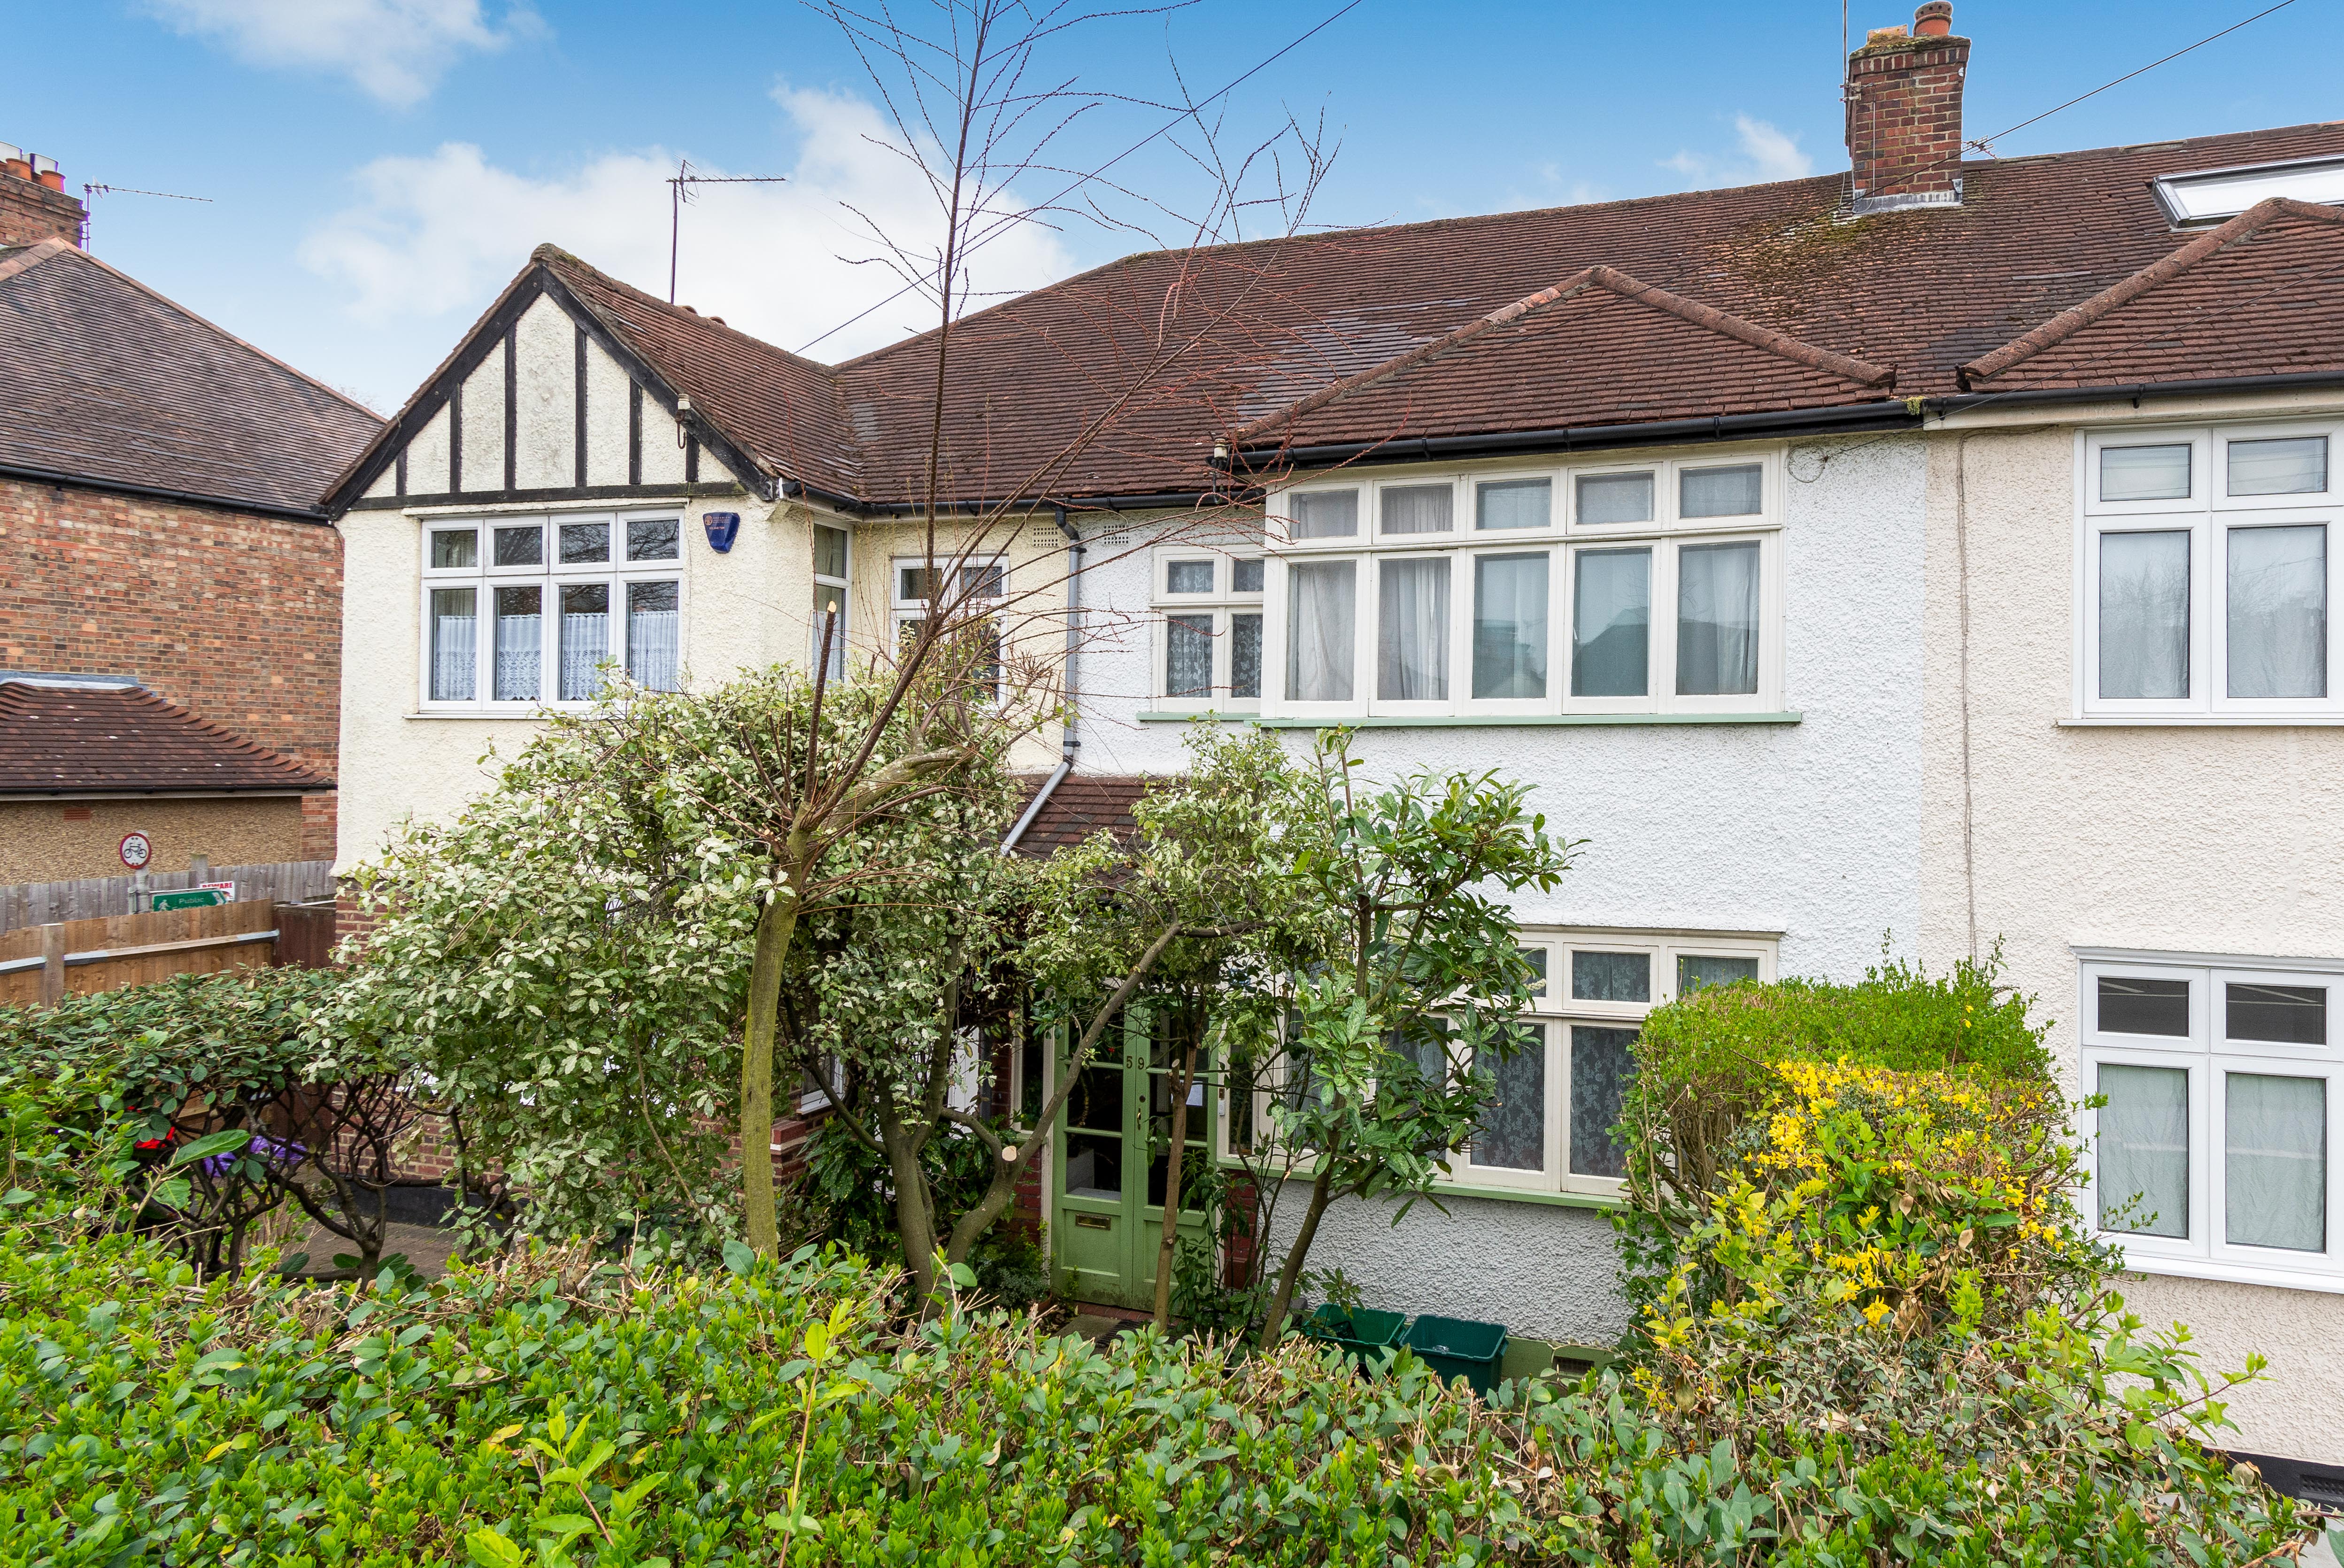 3 bed terraced house for sale in Queen Anne Avenue, Bromley, BR2 